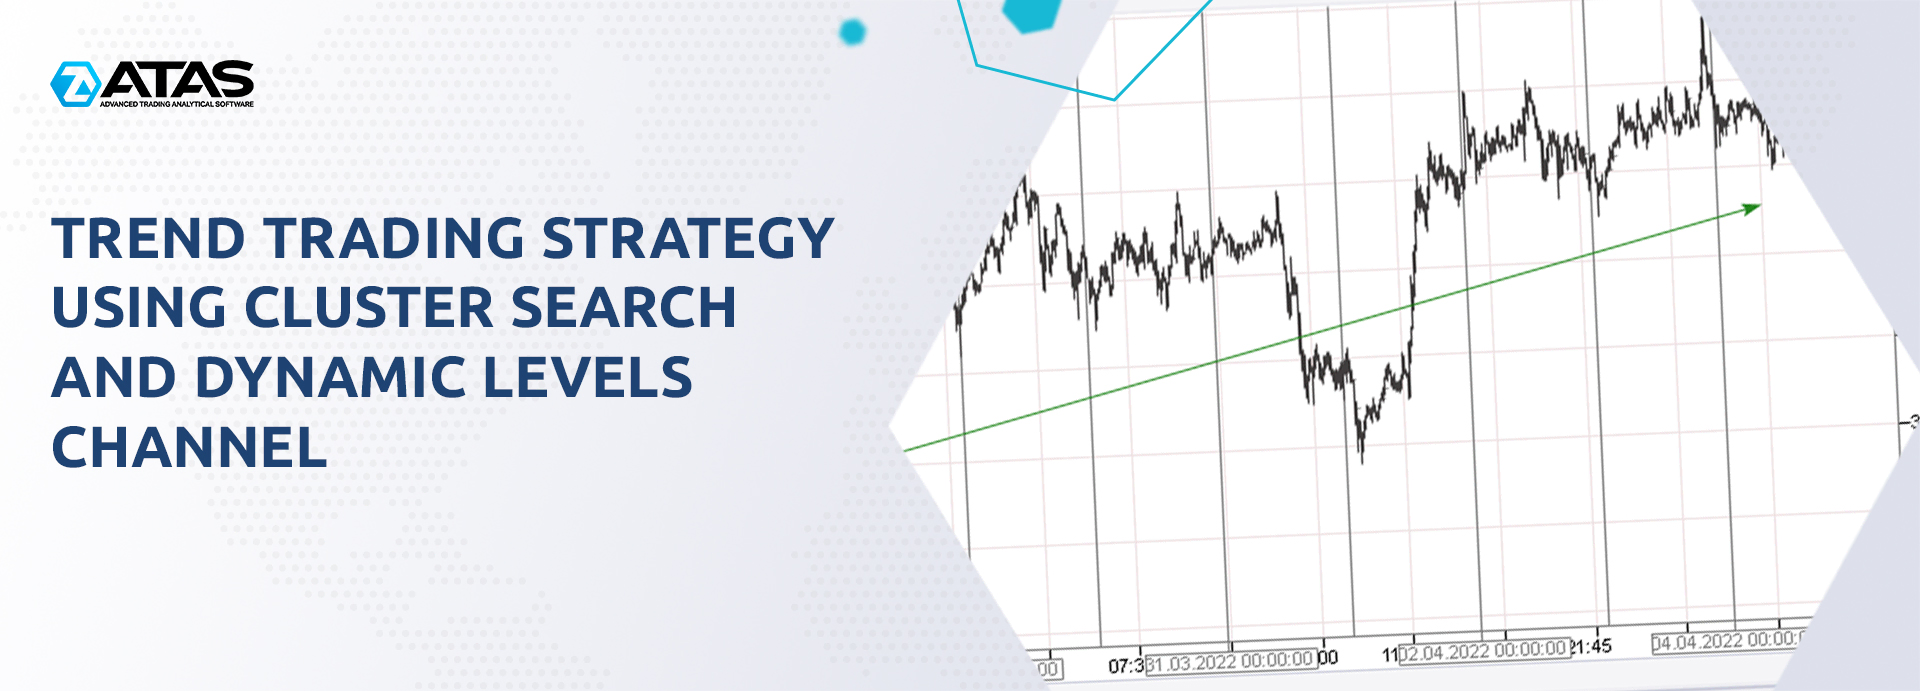 Trend Trading strategy using Cluster Search and Dynamic Levels Channel